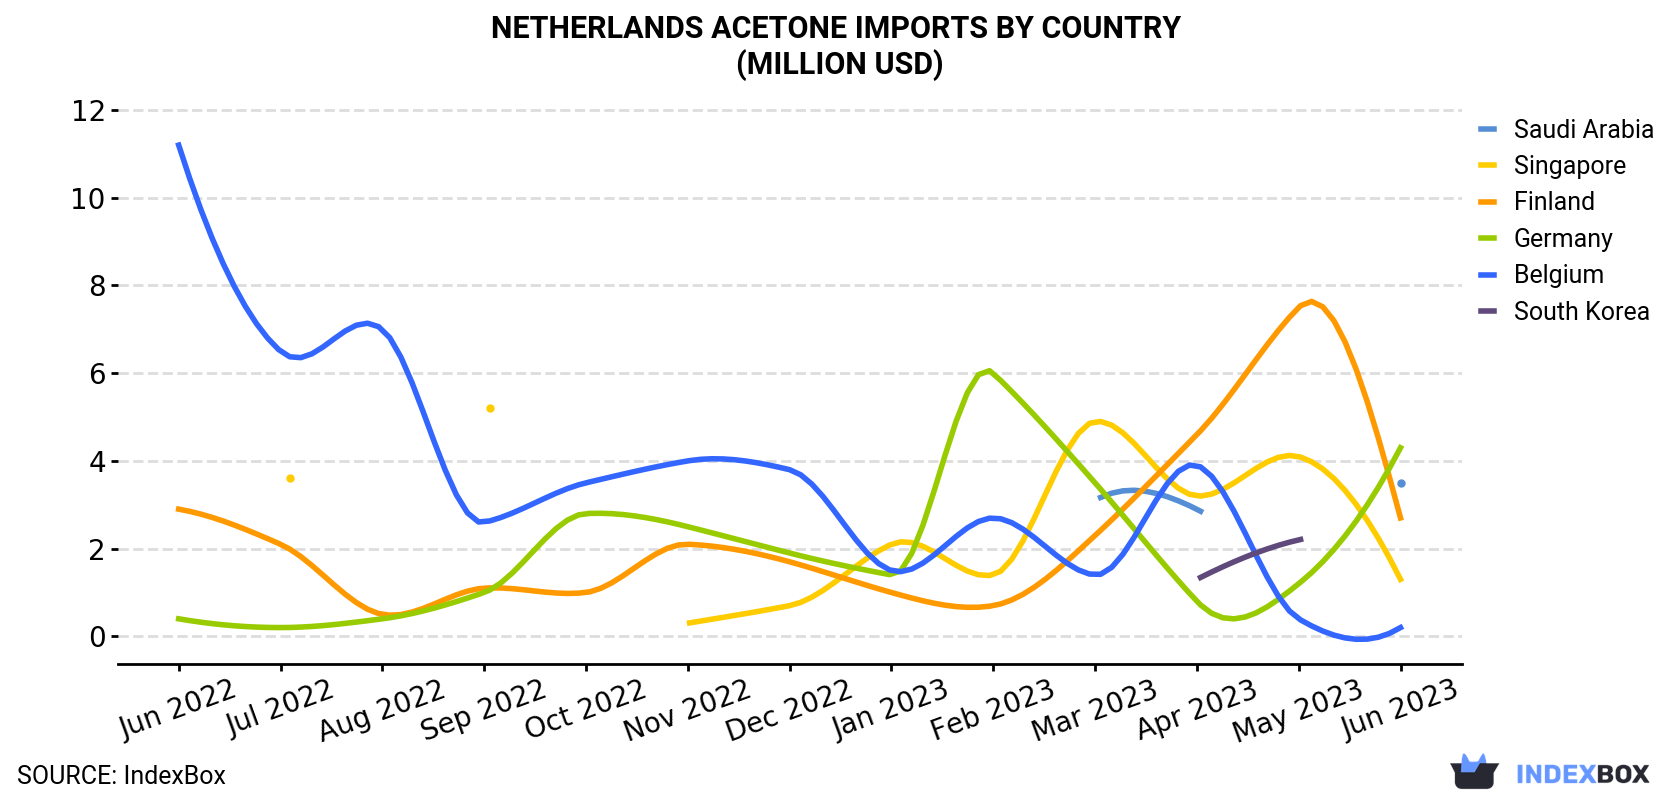 Netherlands Acetone Imports By Country (Million USD)